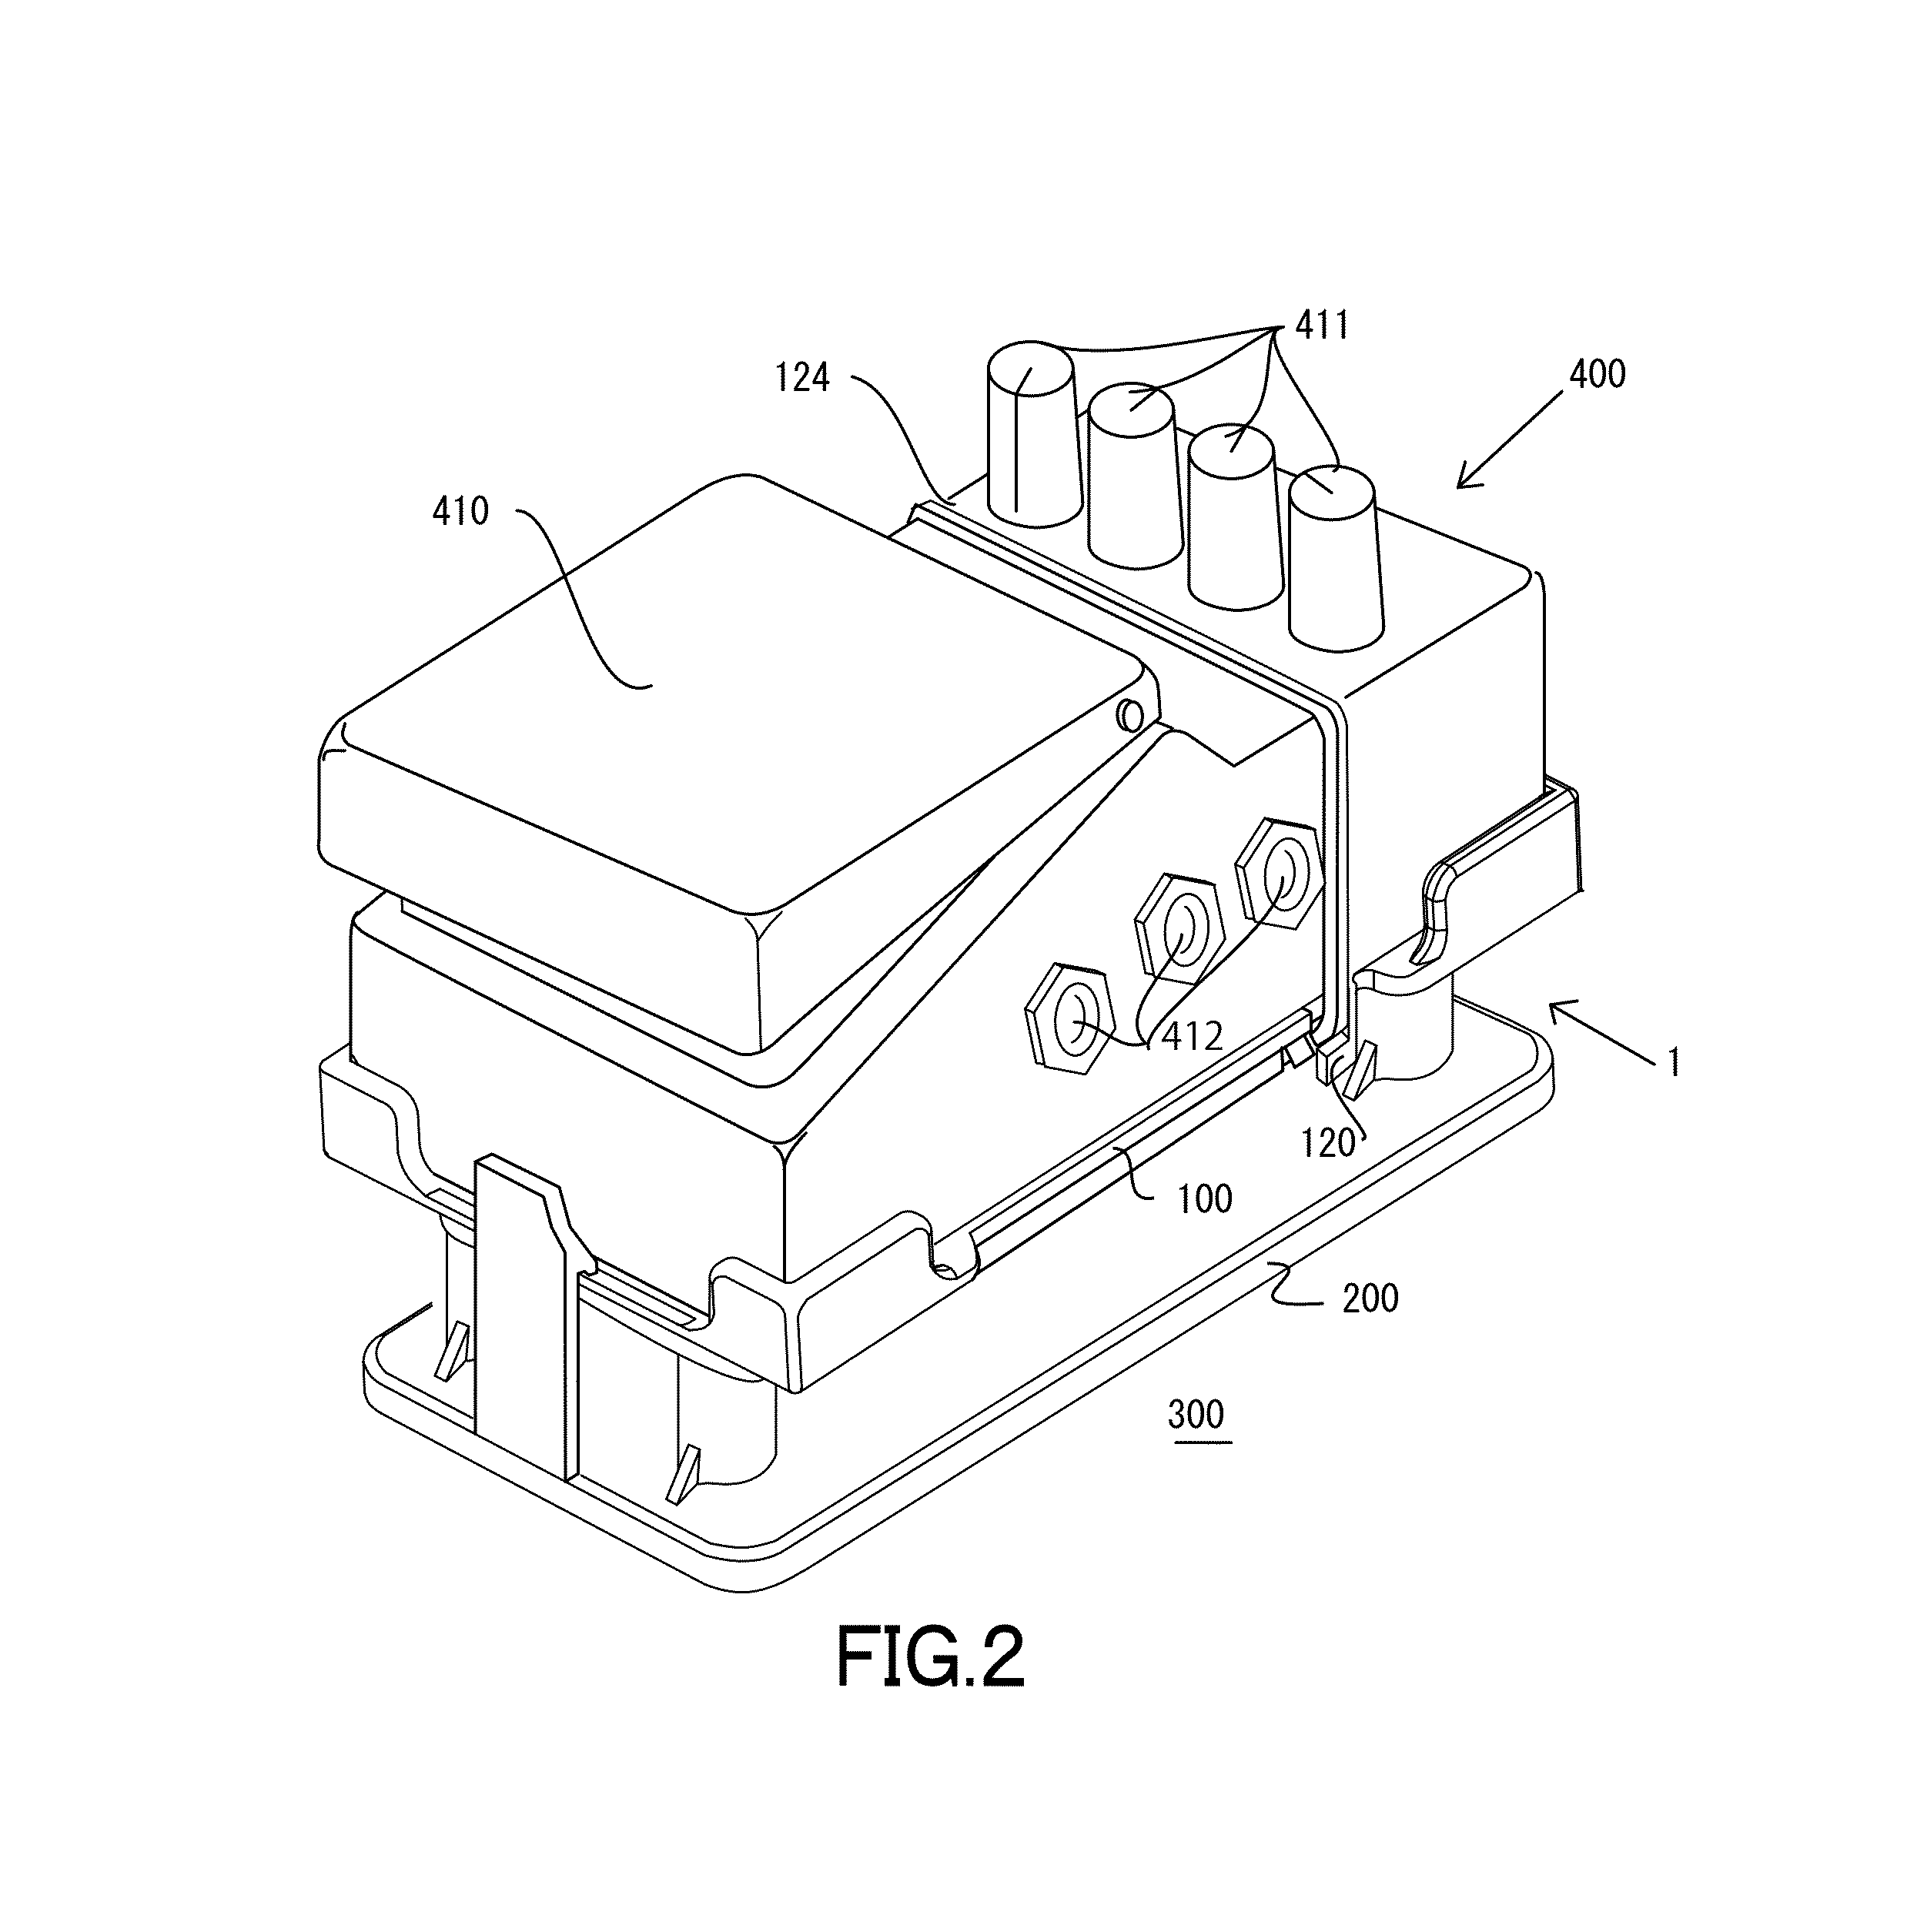 Effector affixing device